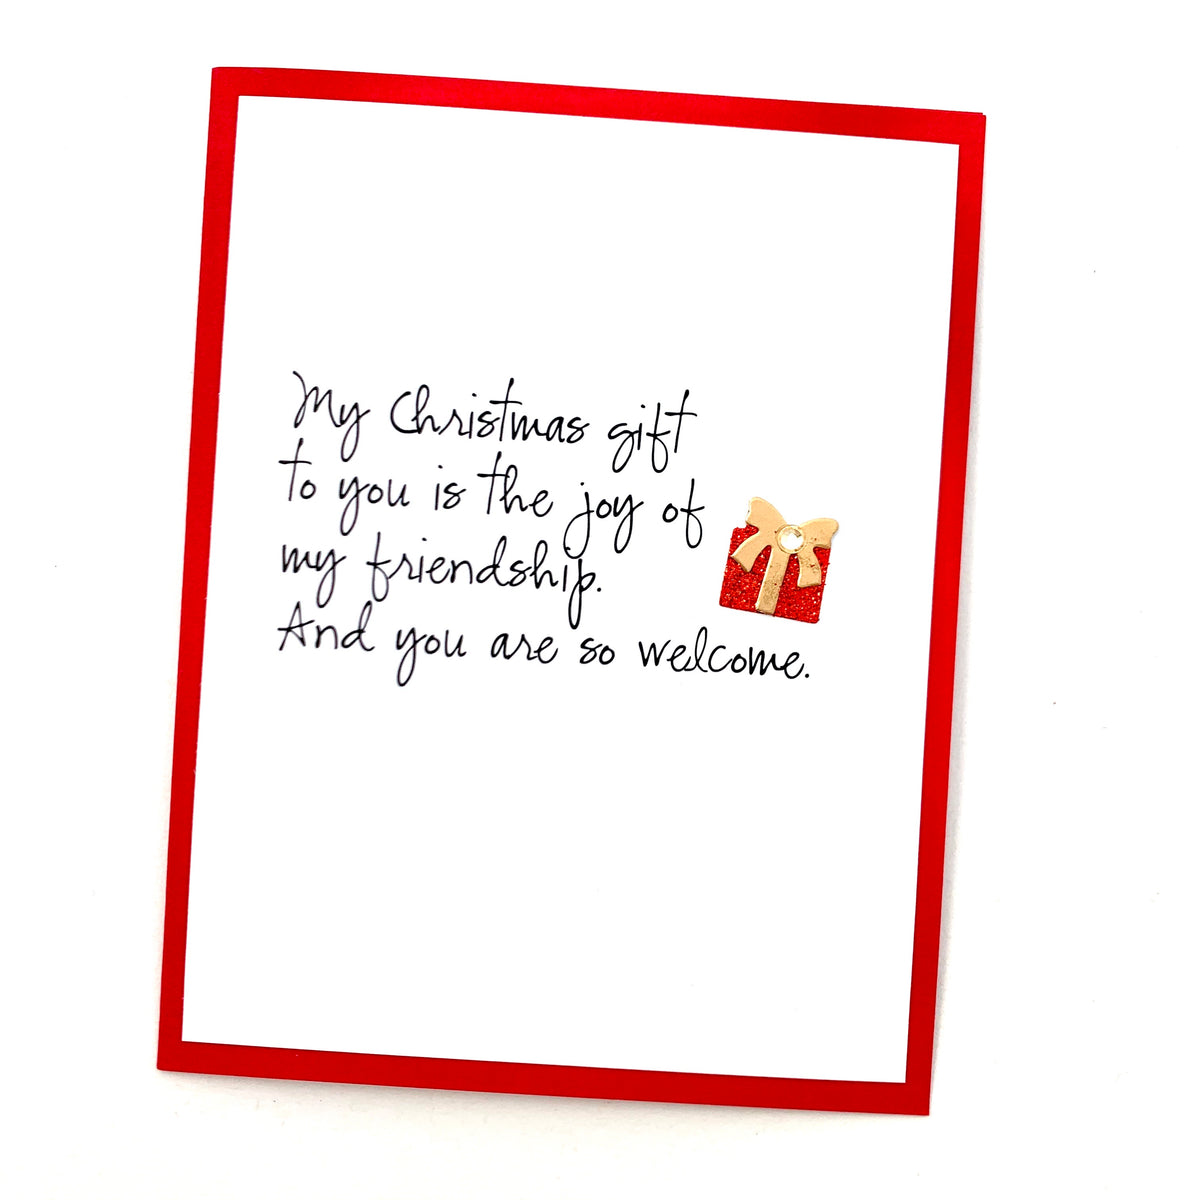 Holiday Christmas Gift is Friendship card